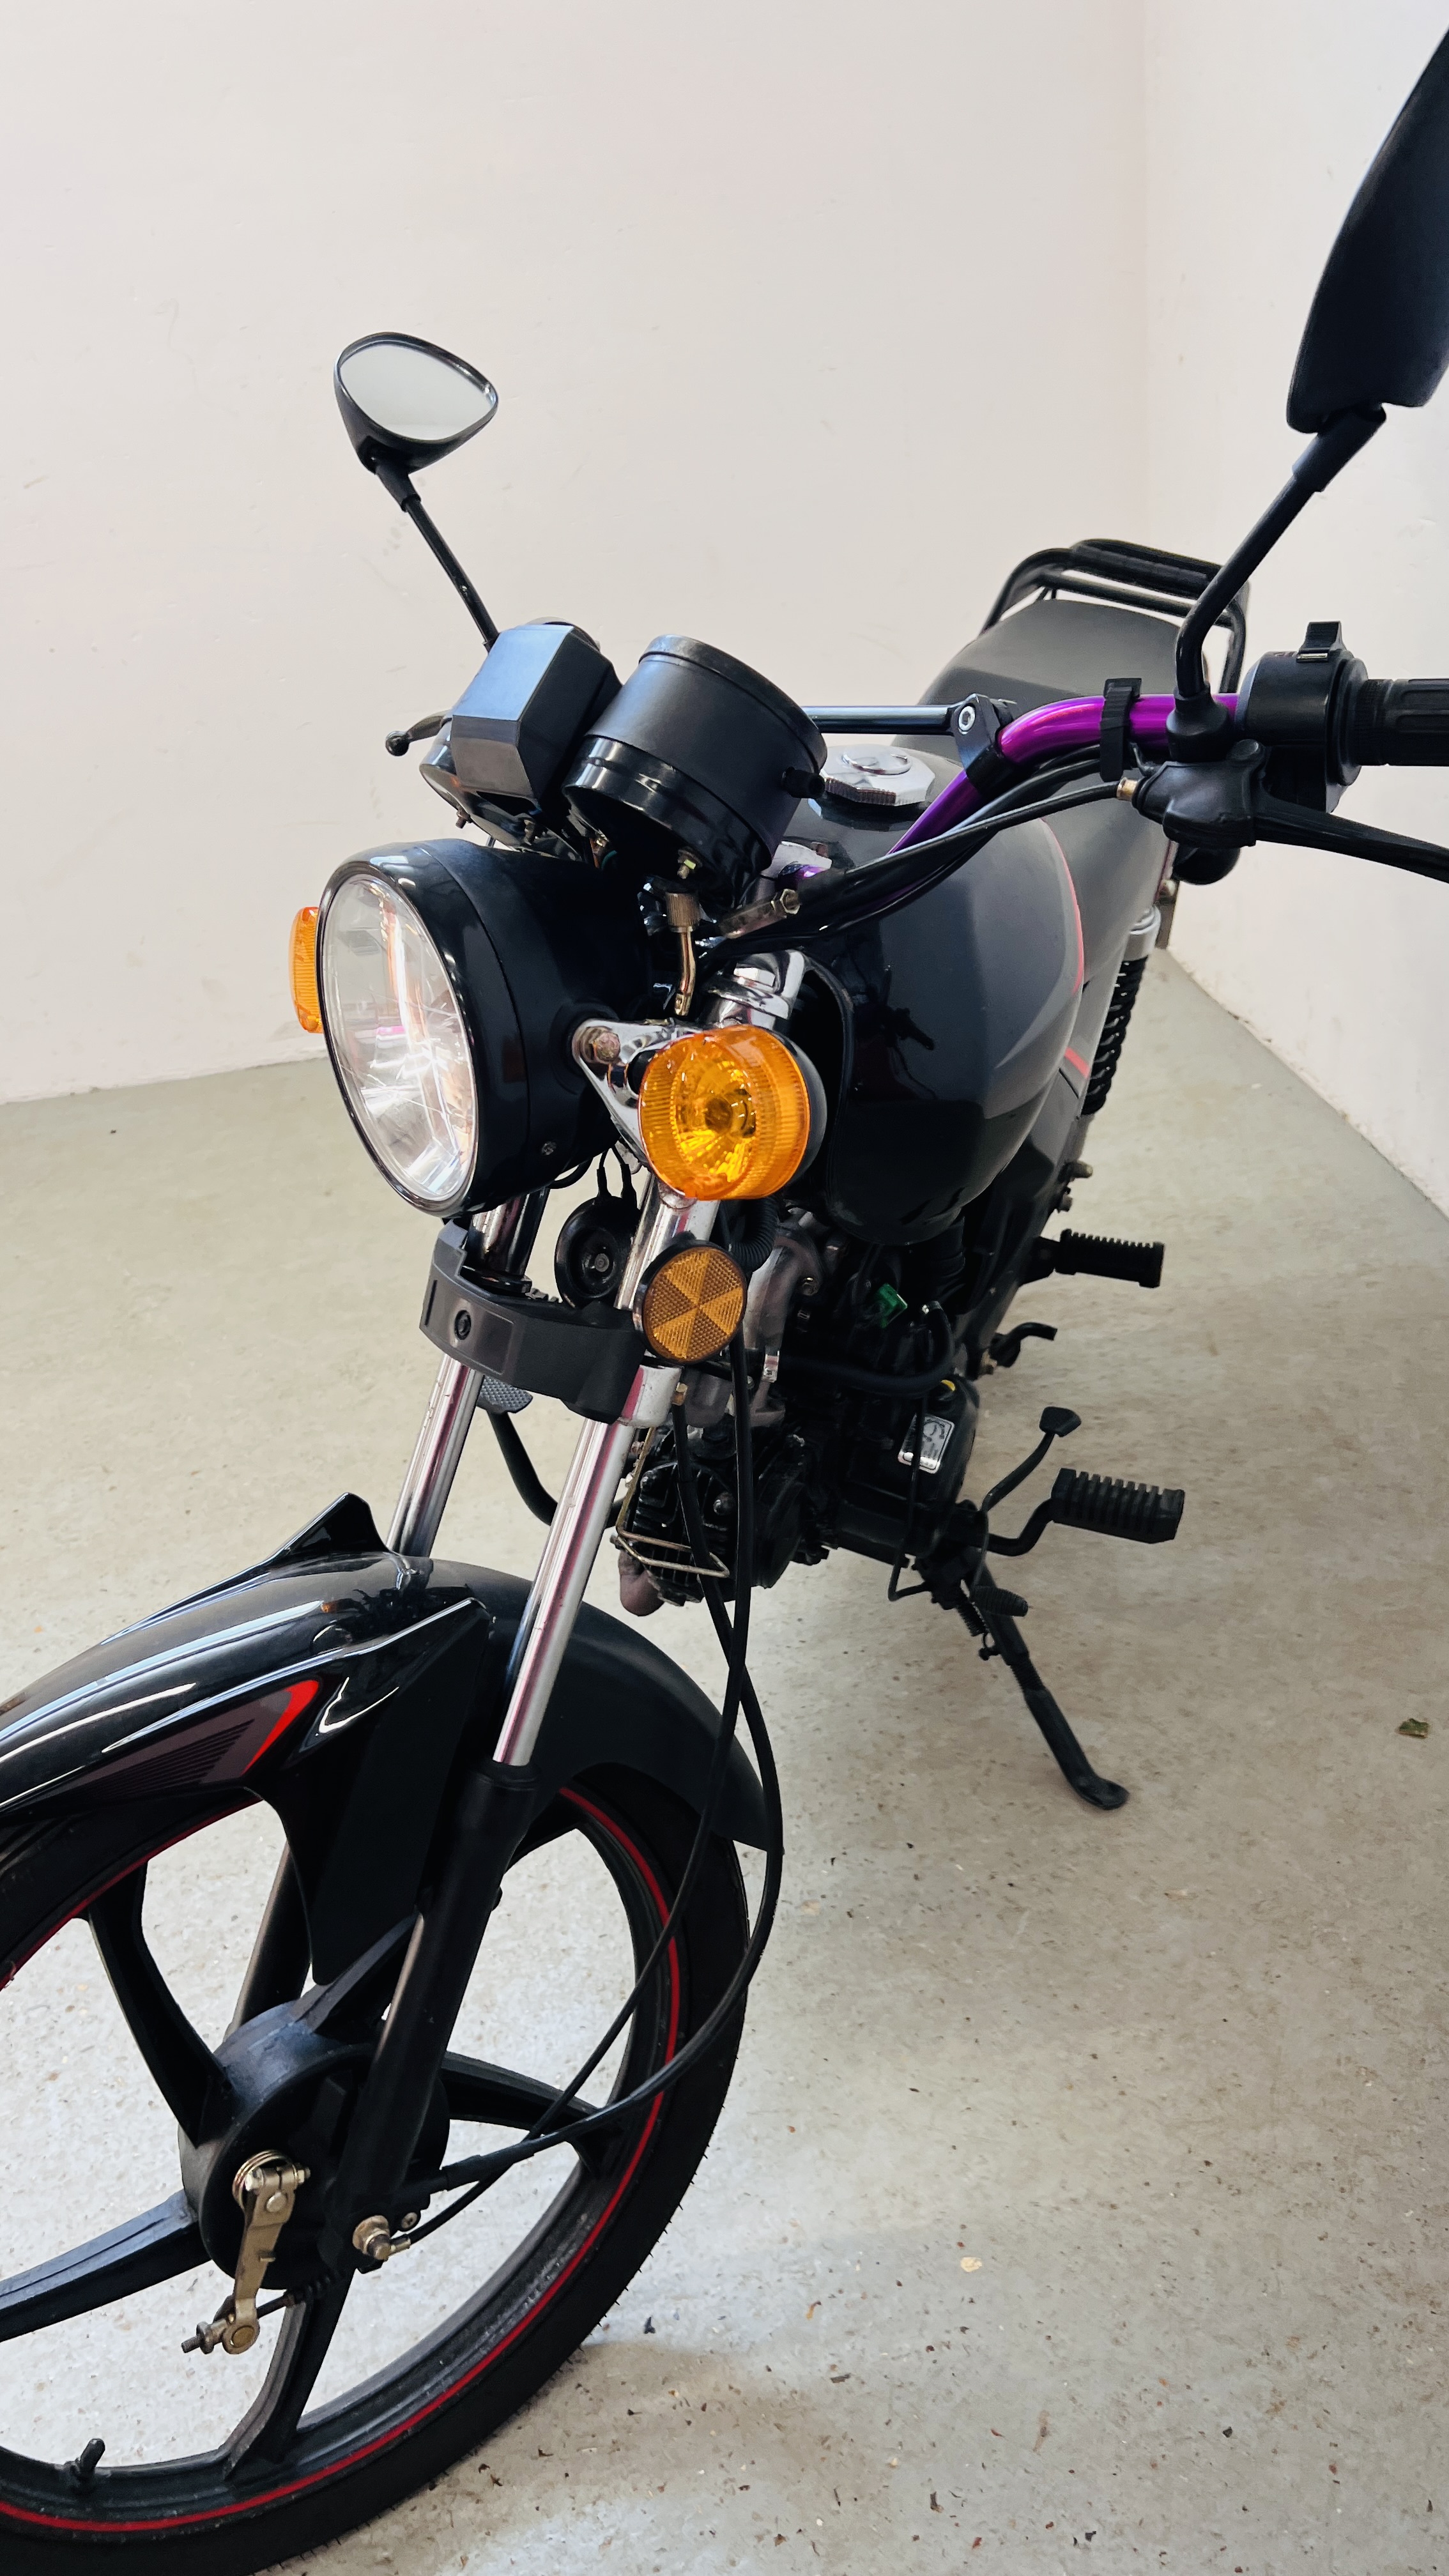 CHAMP 48CC MOTOR CYCLE. VRM - KX69 CHD. FIRST REGISTERED: 01/10/2019. MOT EXPIRED: 30/09/2022. - Image 16 of 22